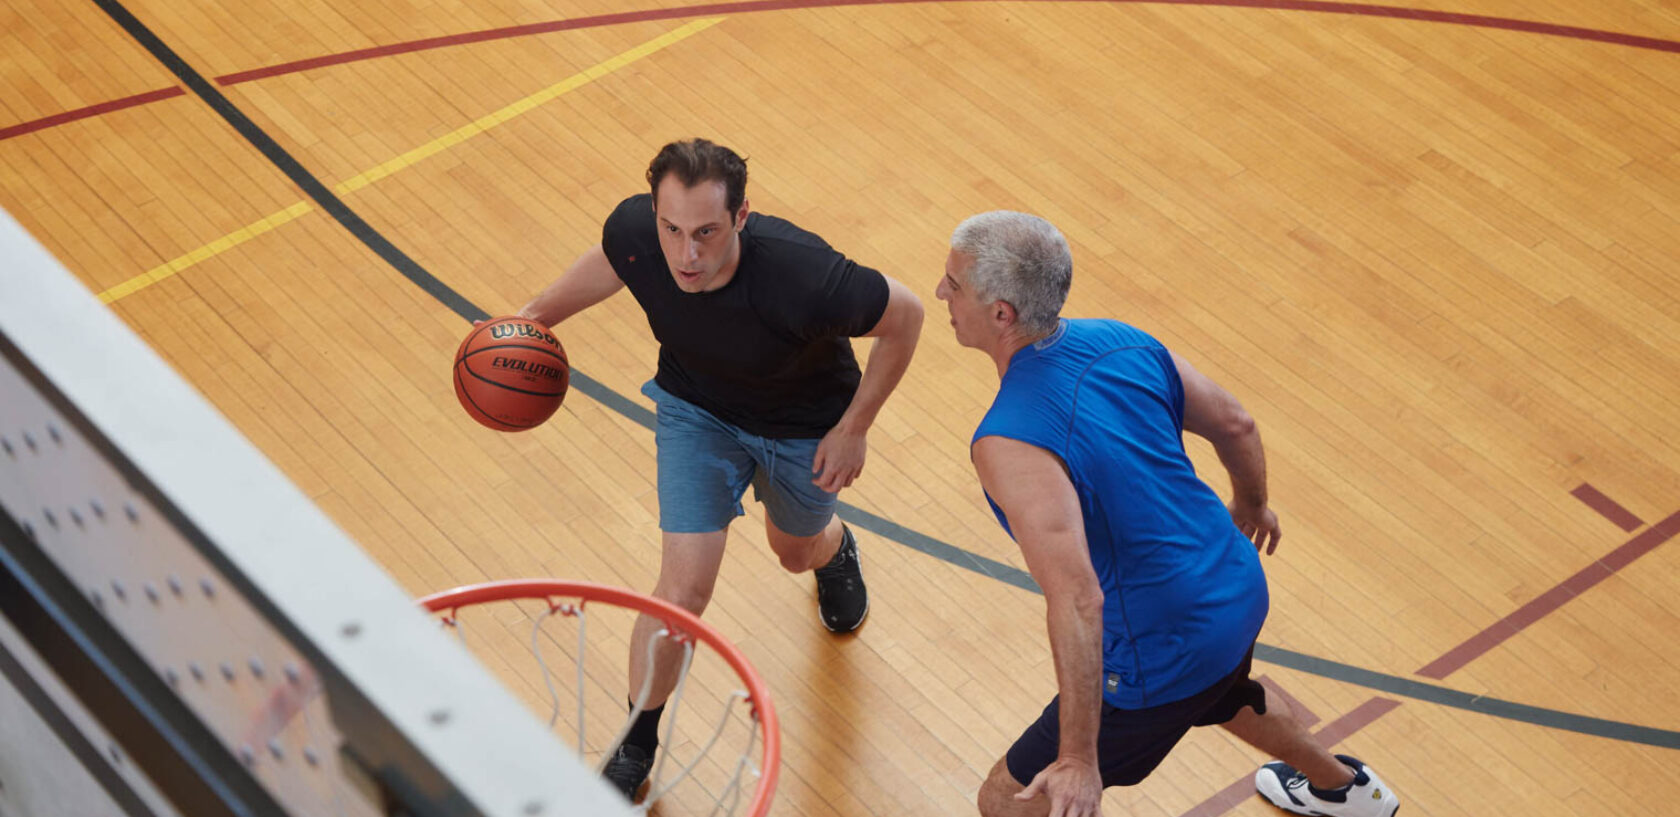 Two adult men playing basketball.